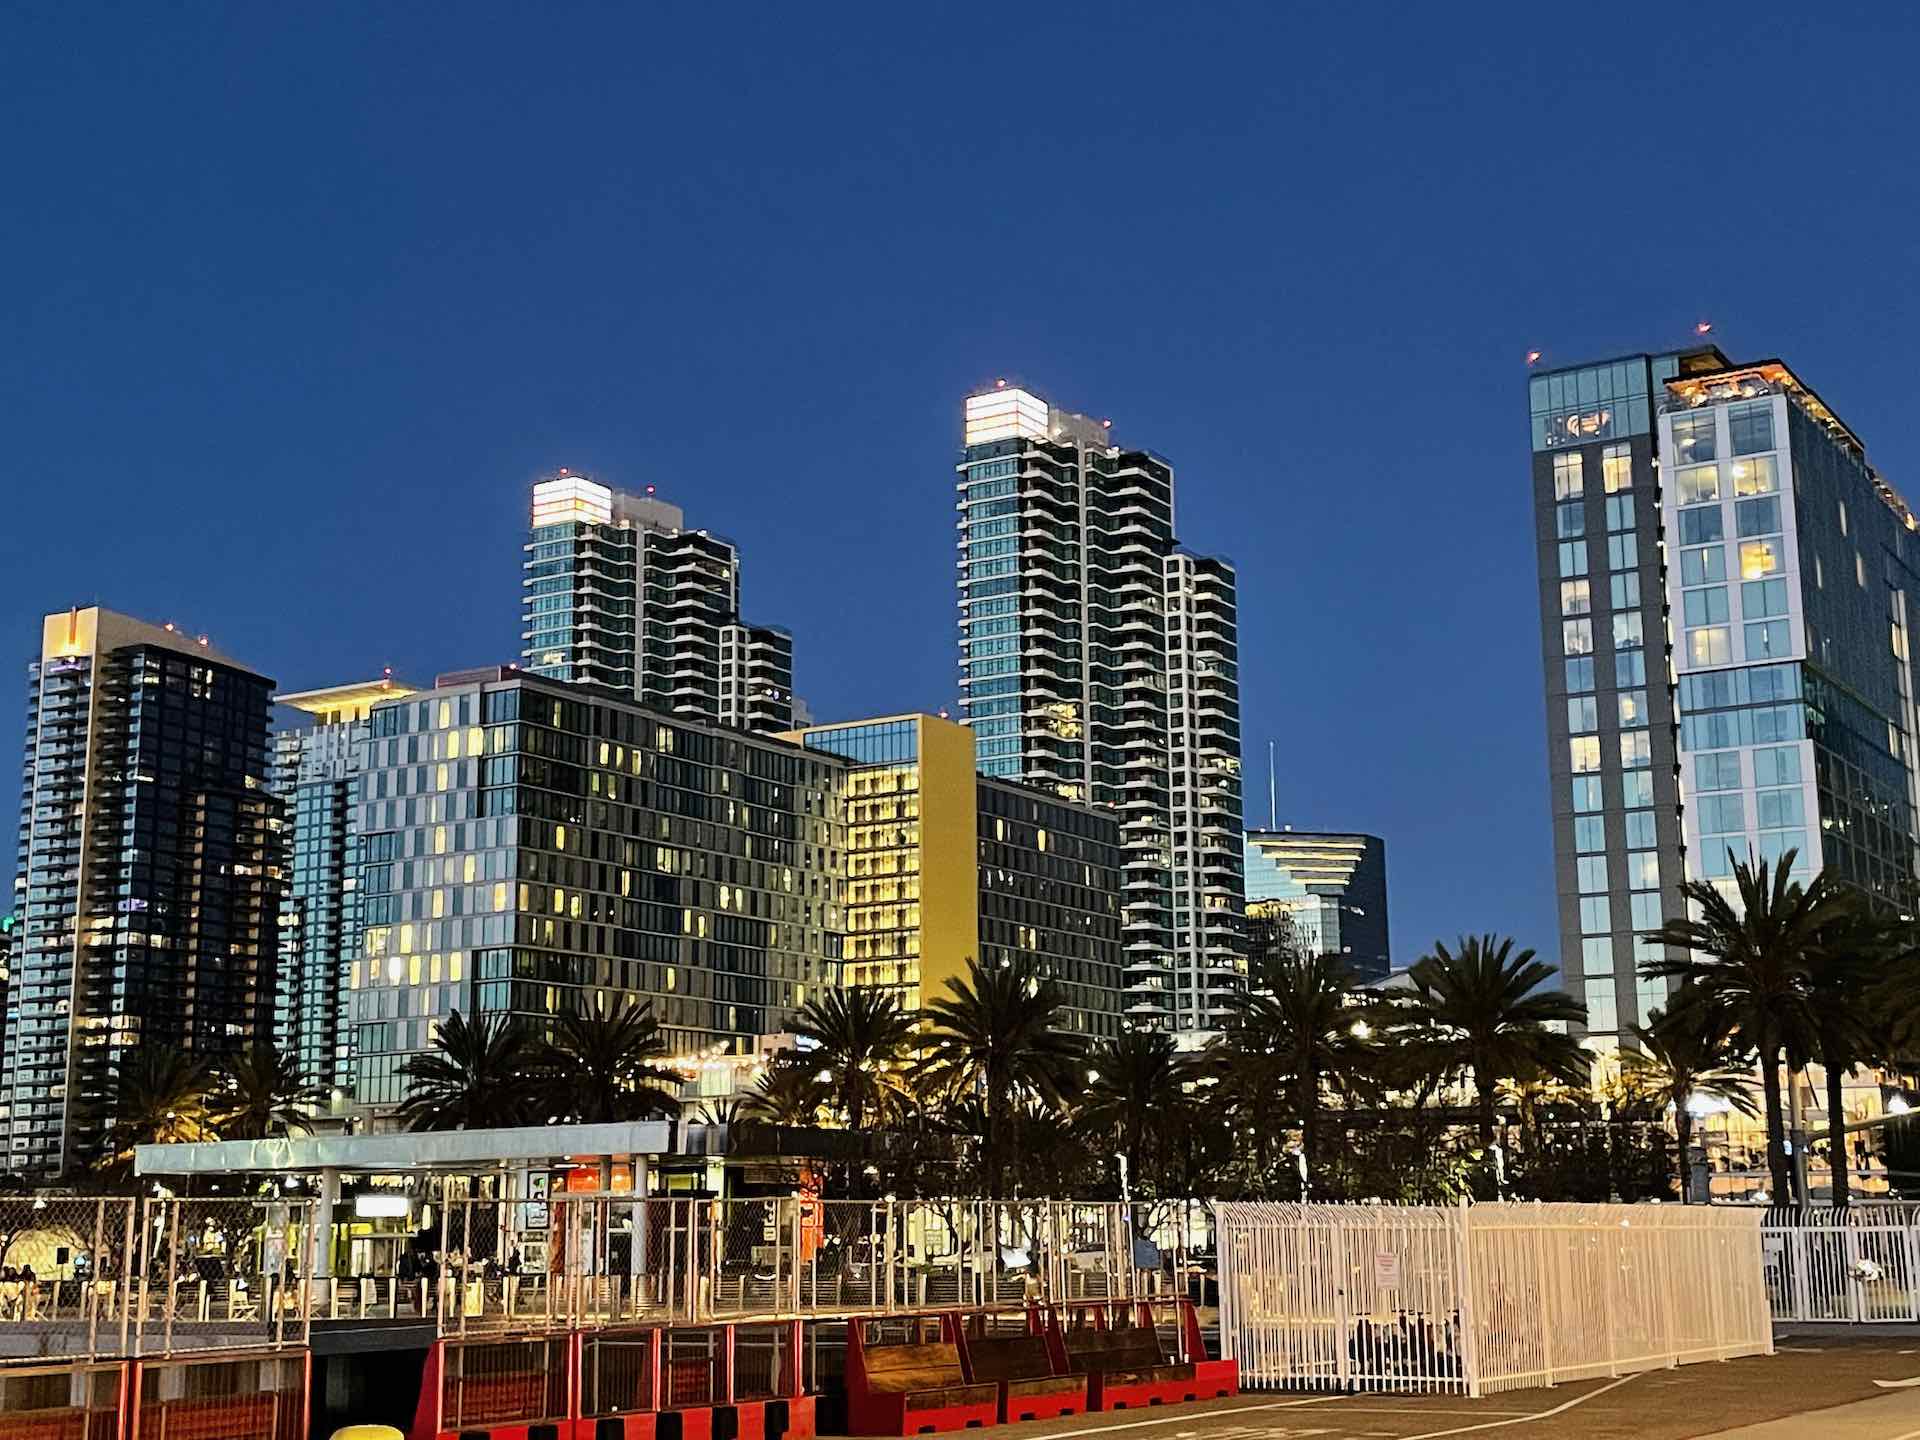 Luxury condominium buildings in San Diego Columbia District seen from the Broadway Pier